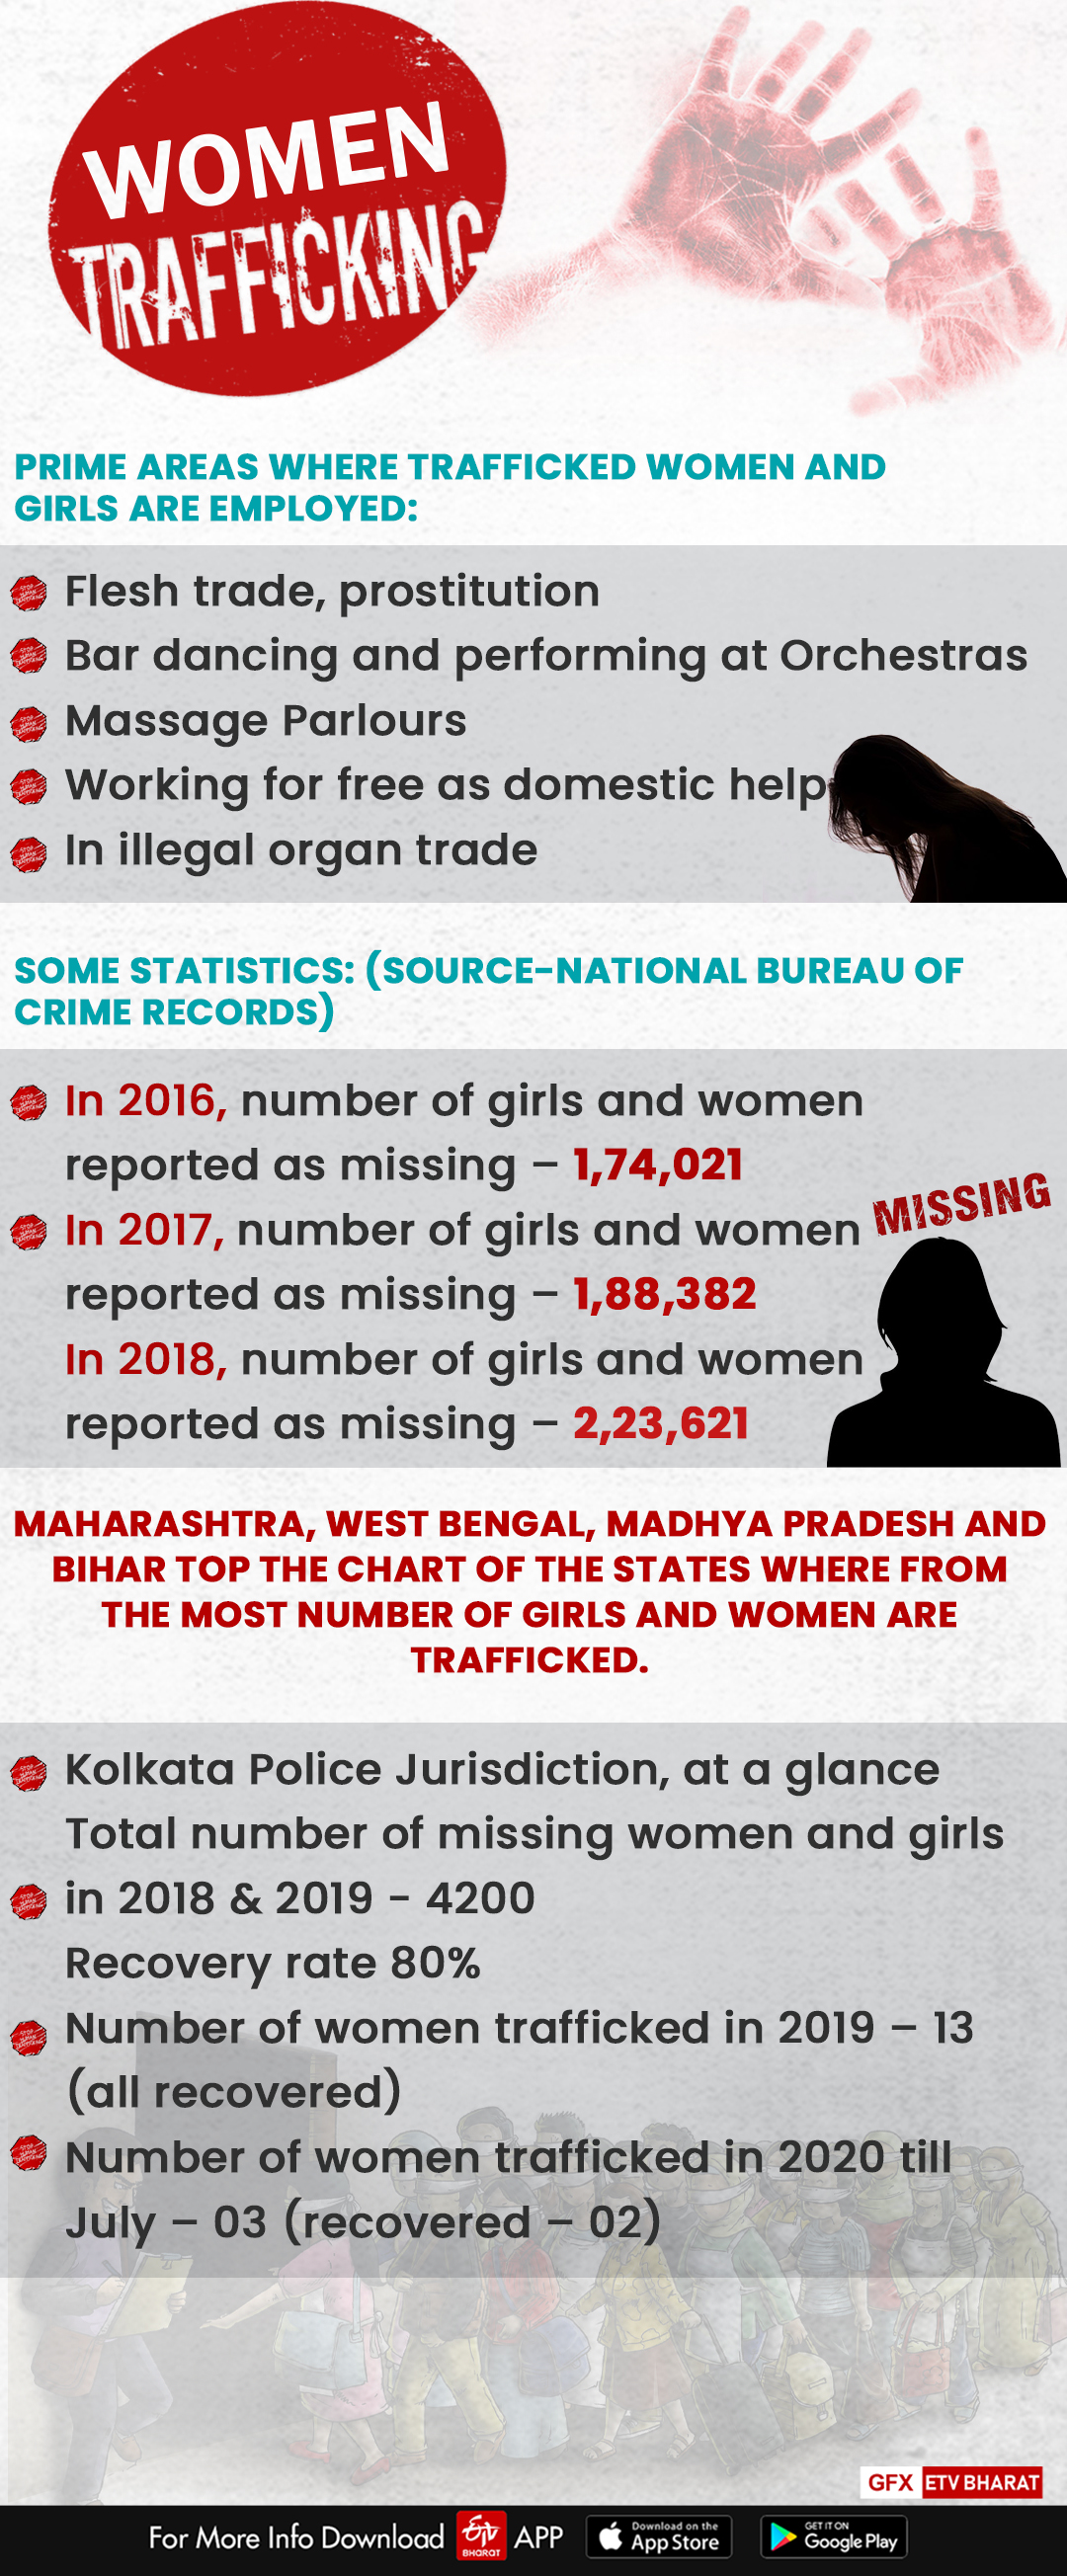 Women trafficking from Eastern India set to rise as lockdown curbs ease